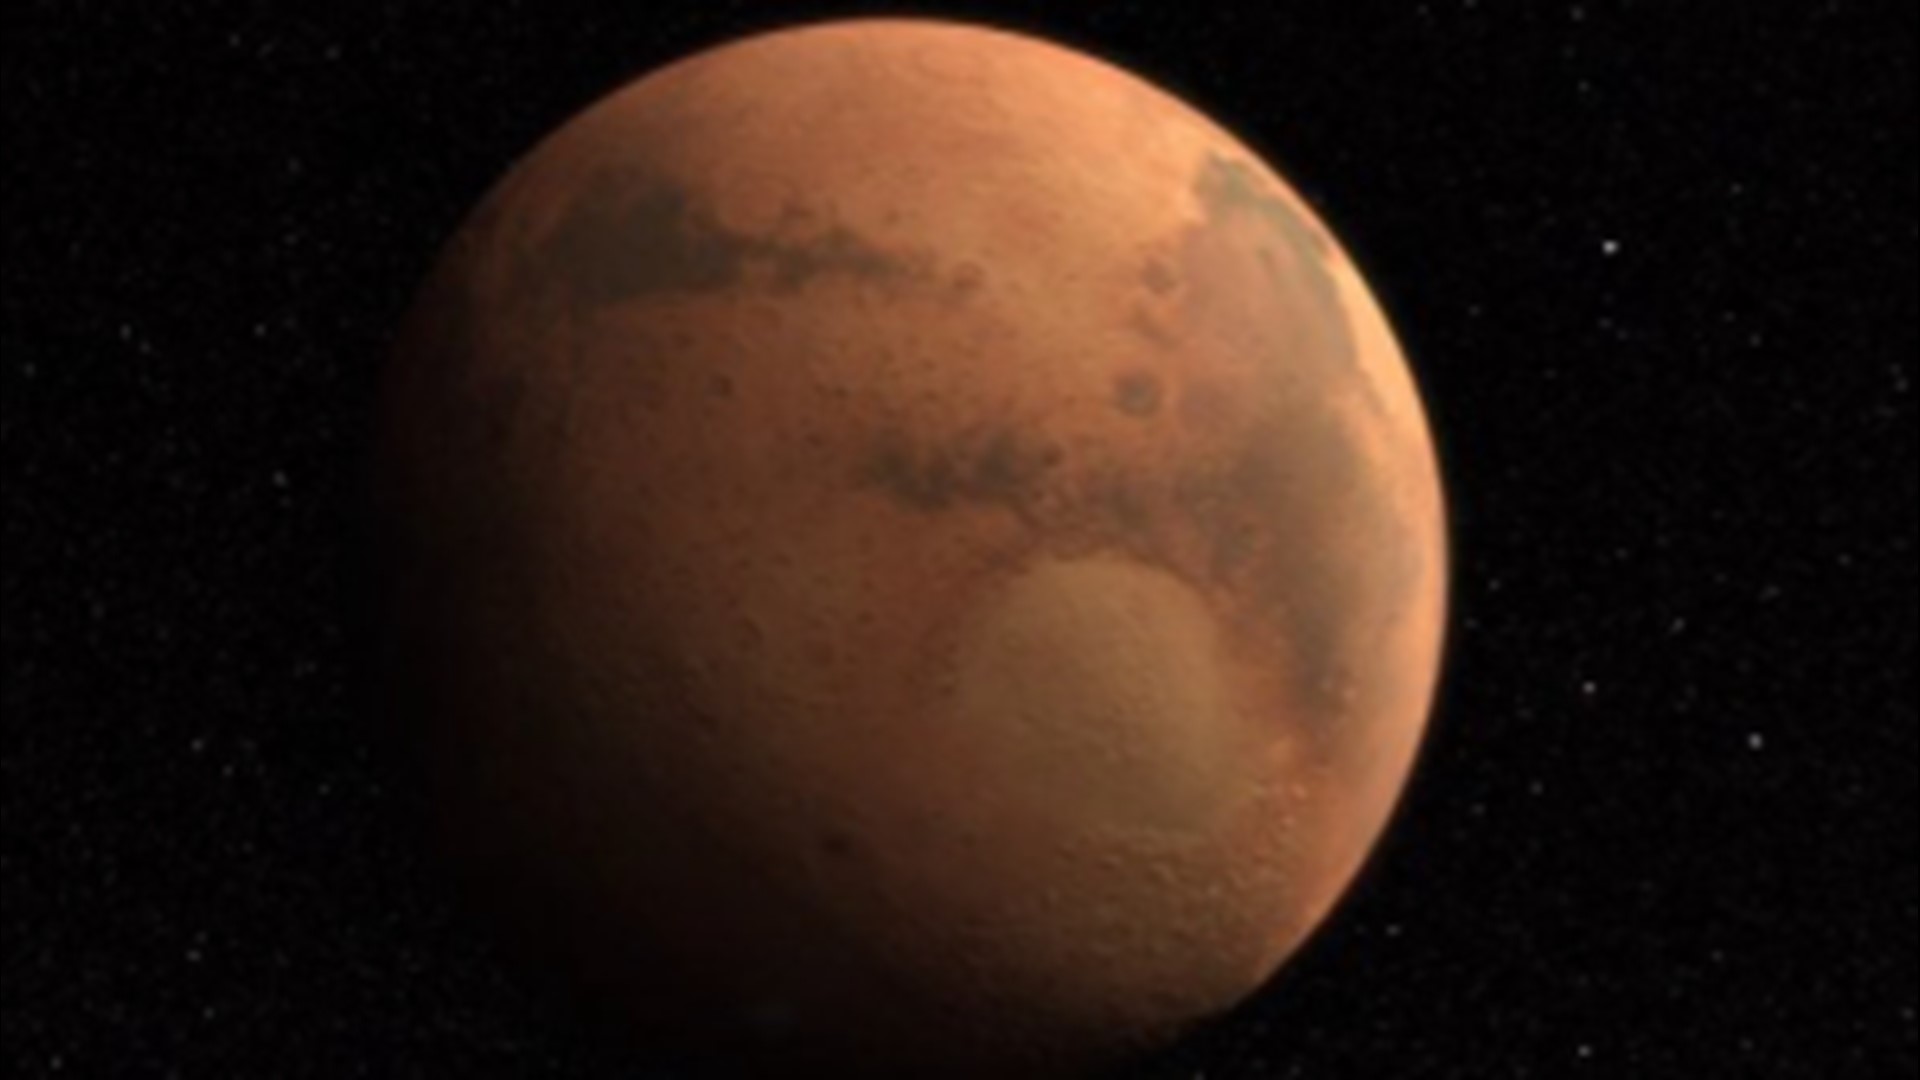 In analyzing Martian meteorites here on Earth, researchers discovered that the dry and dusty Red Planet may have at least two water sources hidden below its crust.